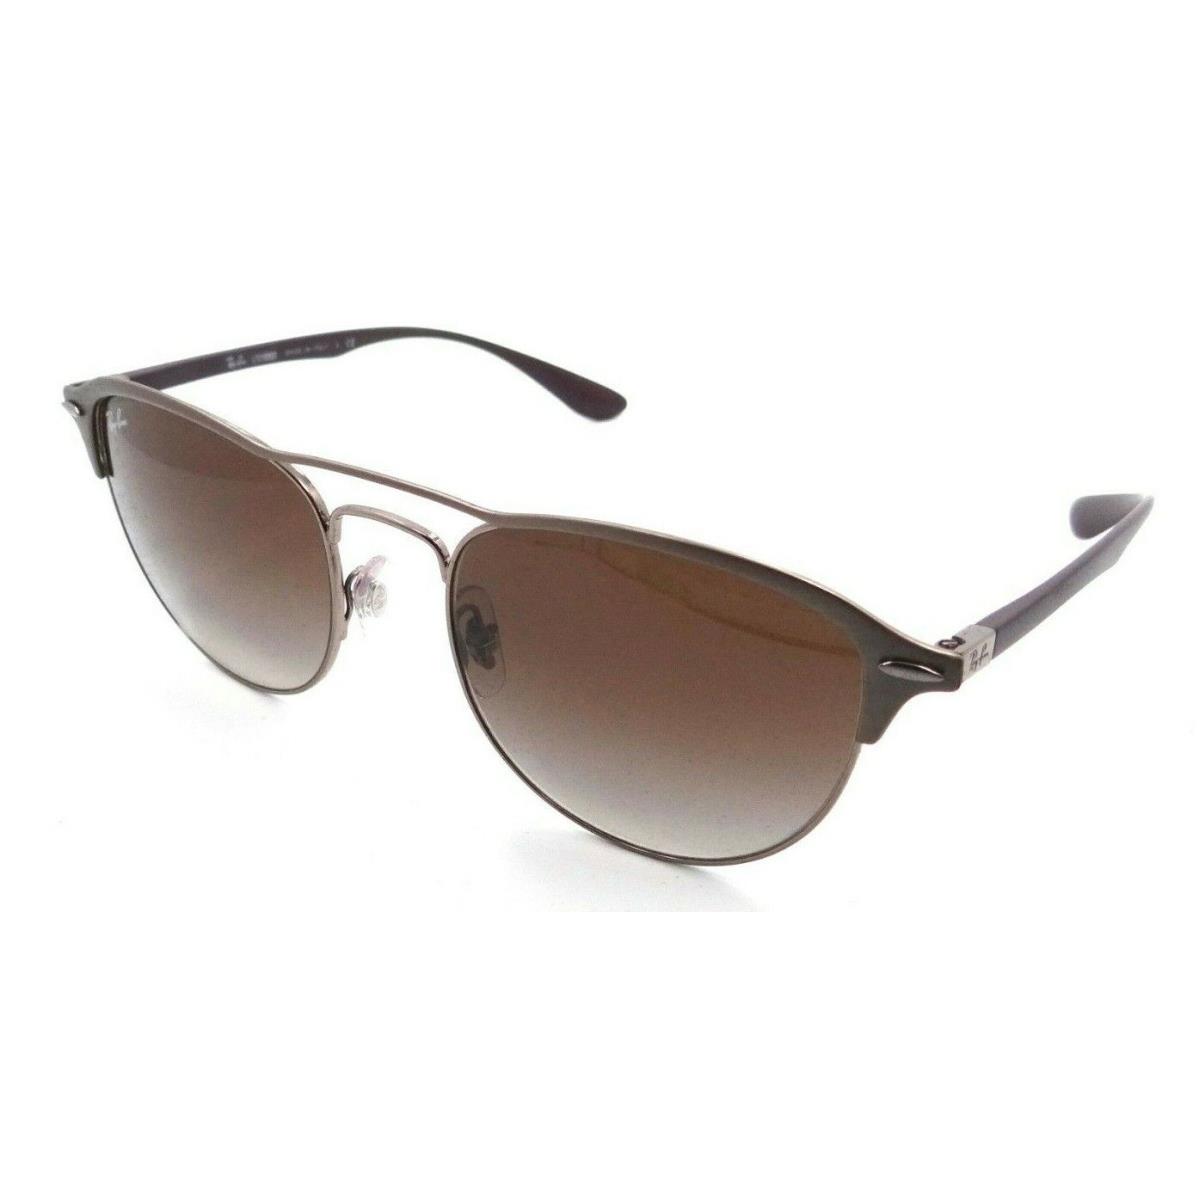 Ray-ban Sunglasses RB 3596 9092/13 54-19-145 Light Brown - Violet/brown Gradient